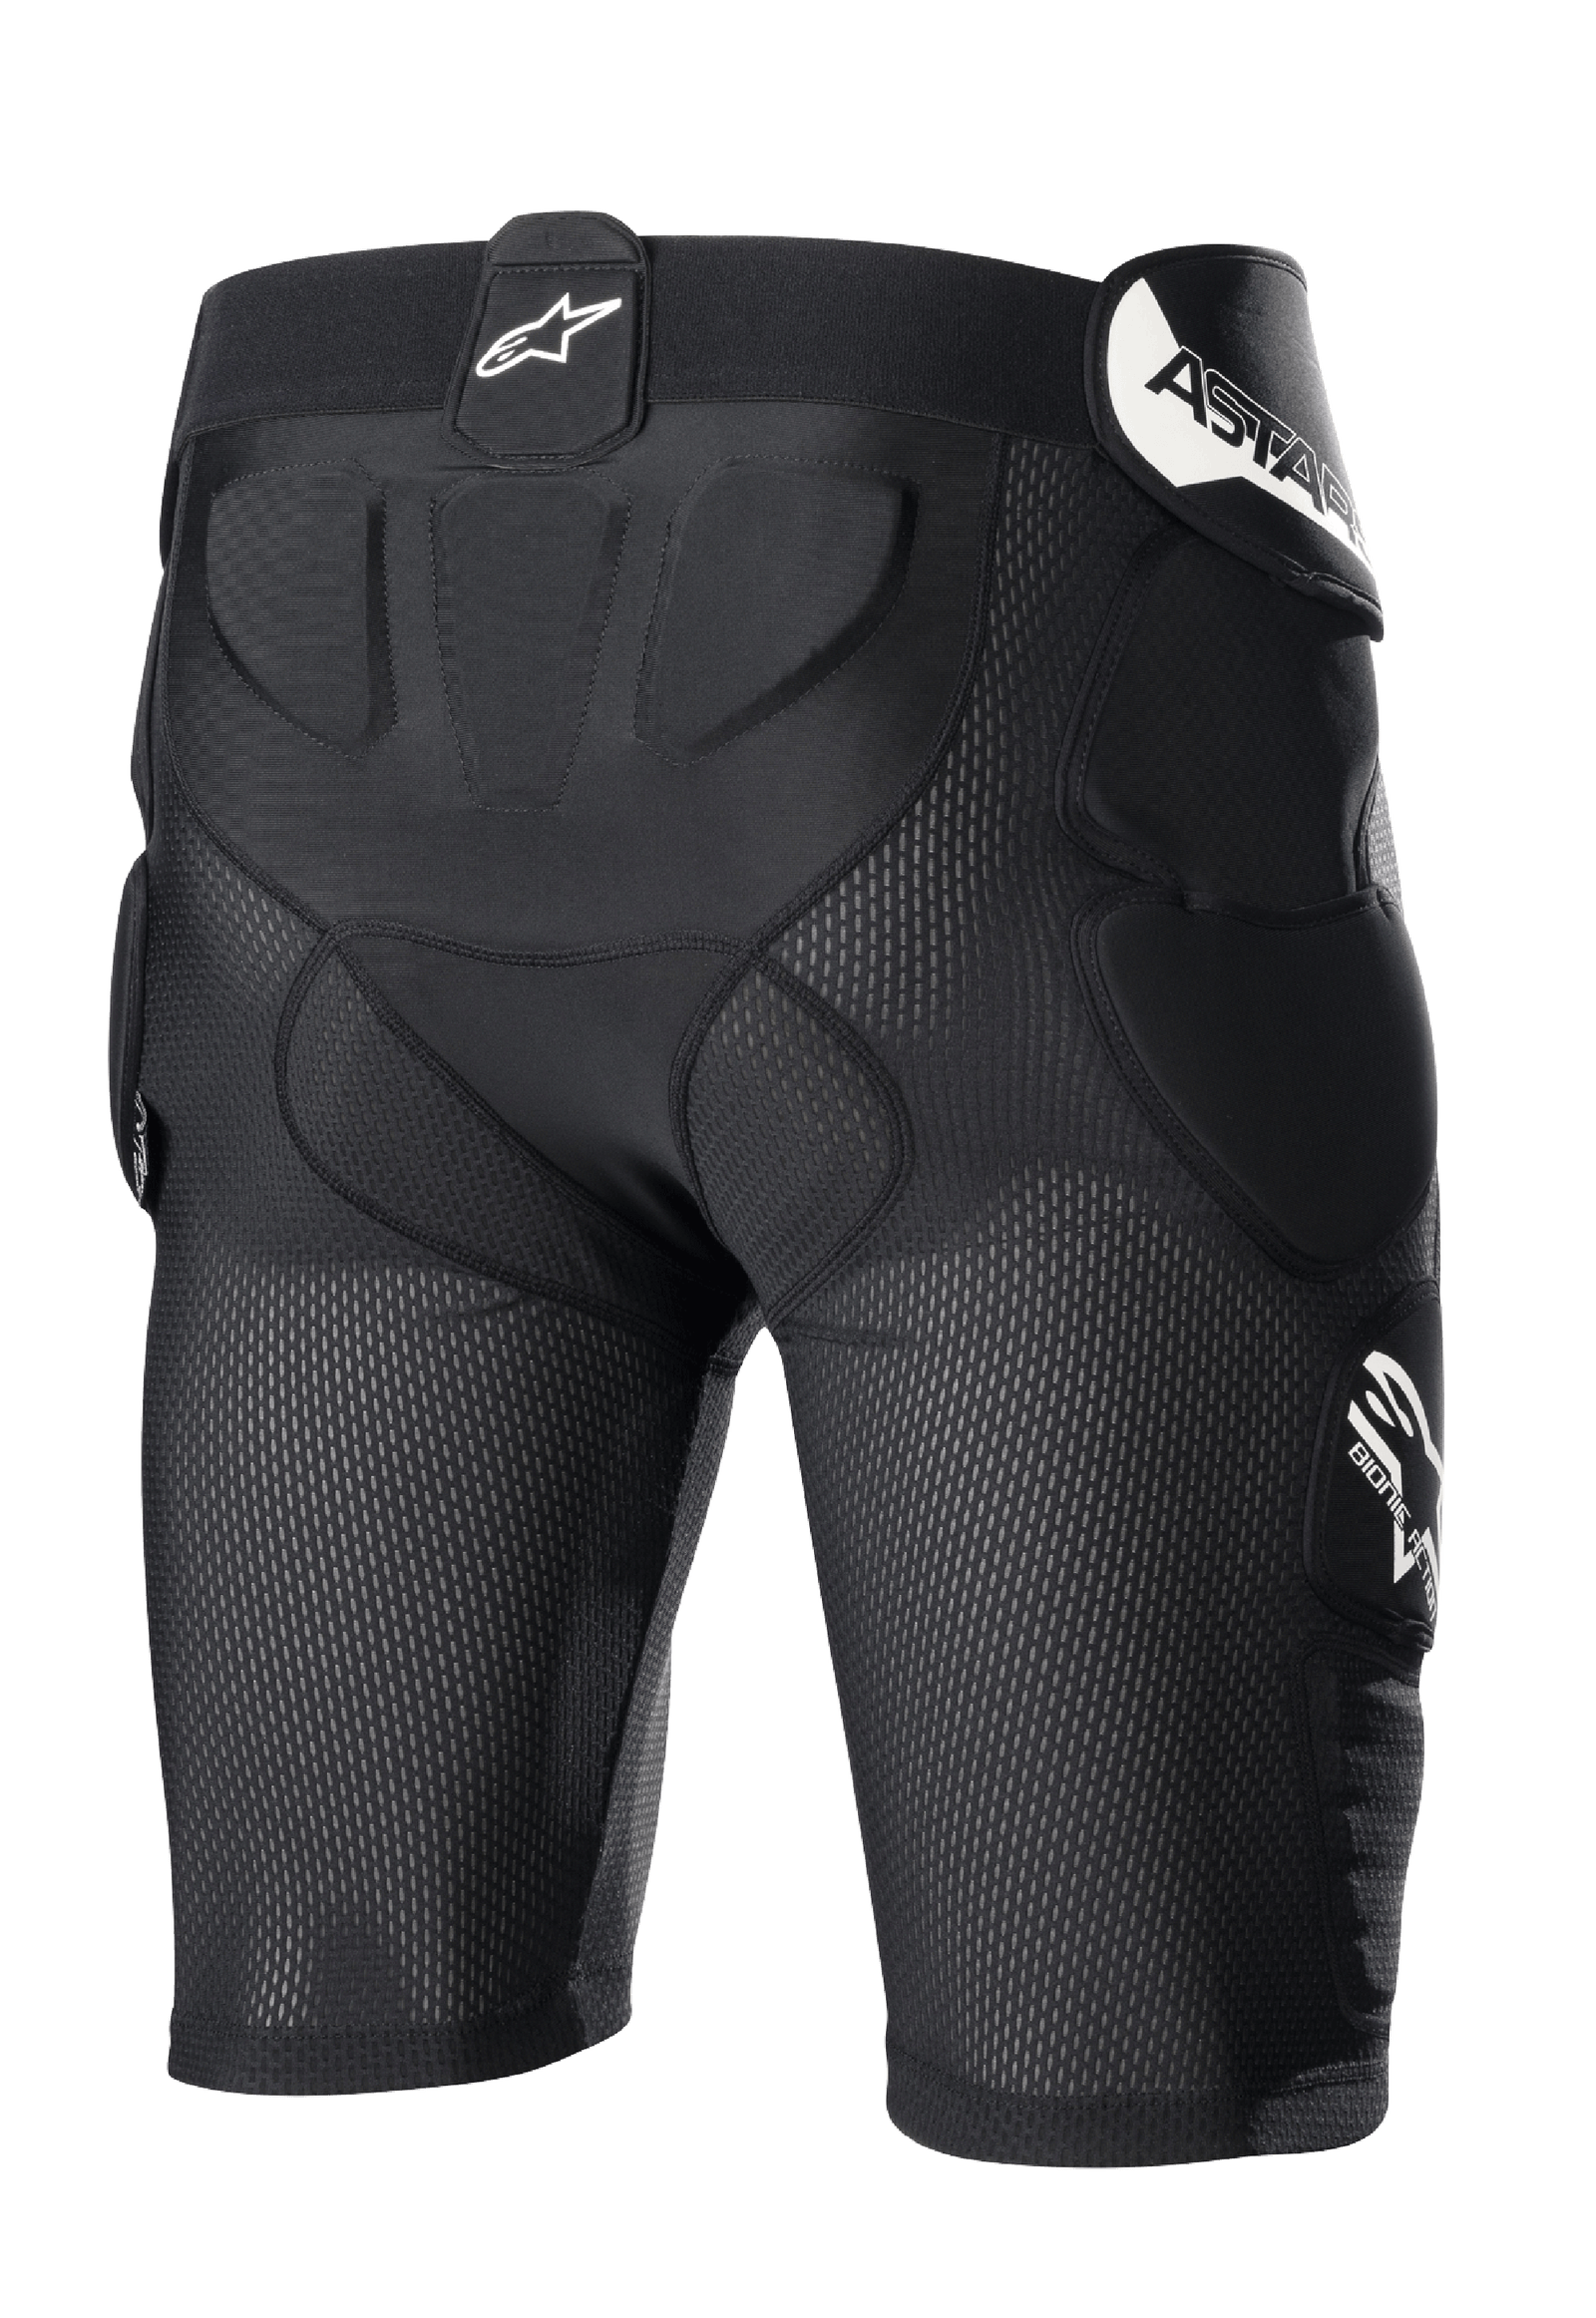 Bionic Action Protection Shorts